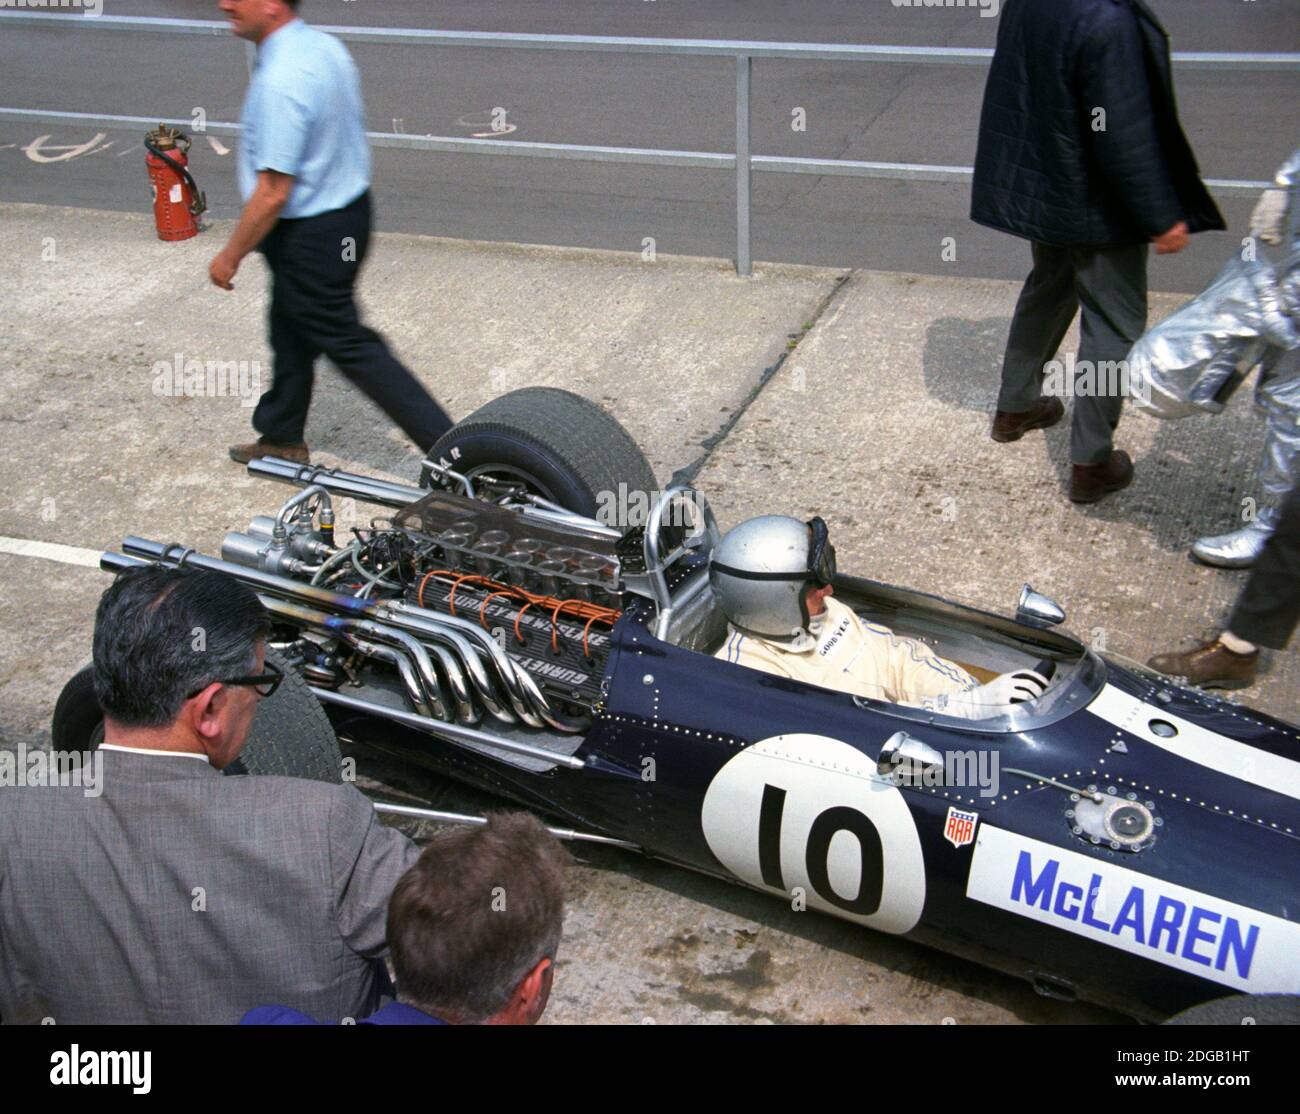 Bruce McLaren in his Eagle-Weslake V12 Formula 1 car arriving at the pits at Silverstone for the 1967 British Grand Prix Practise day, 14th July Stock Photo